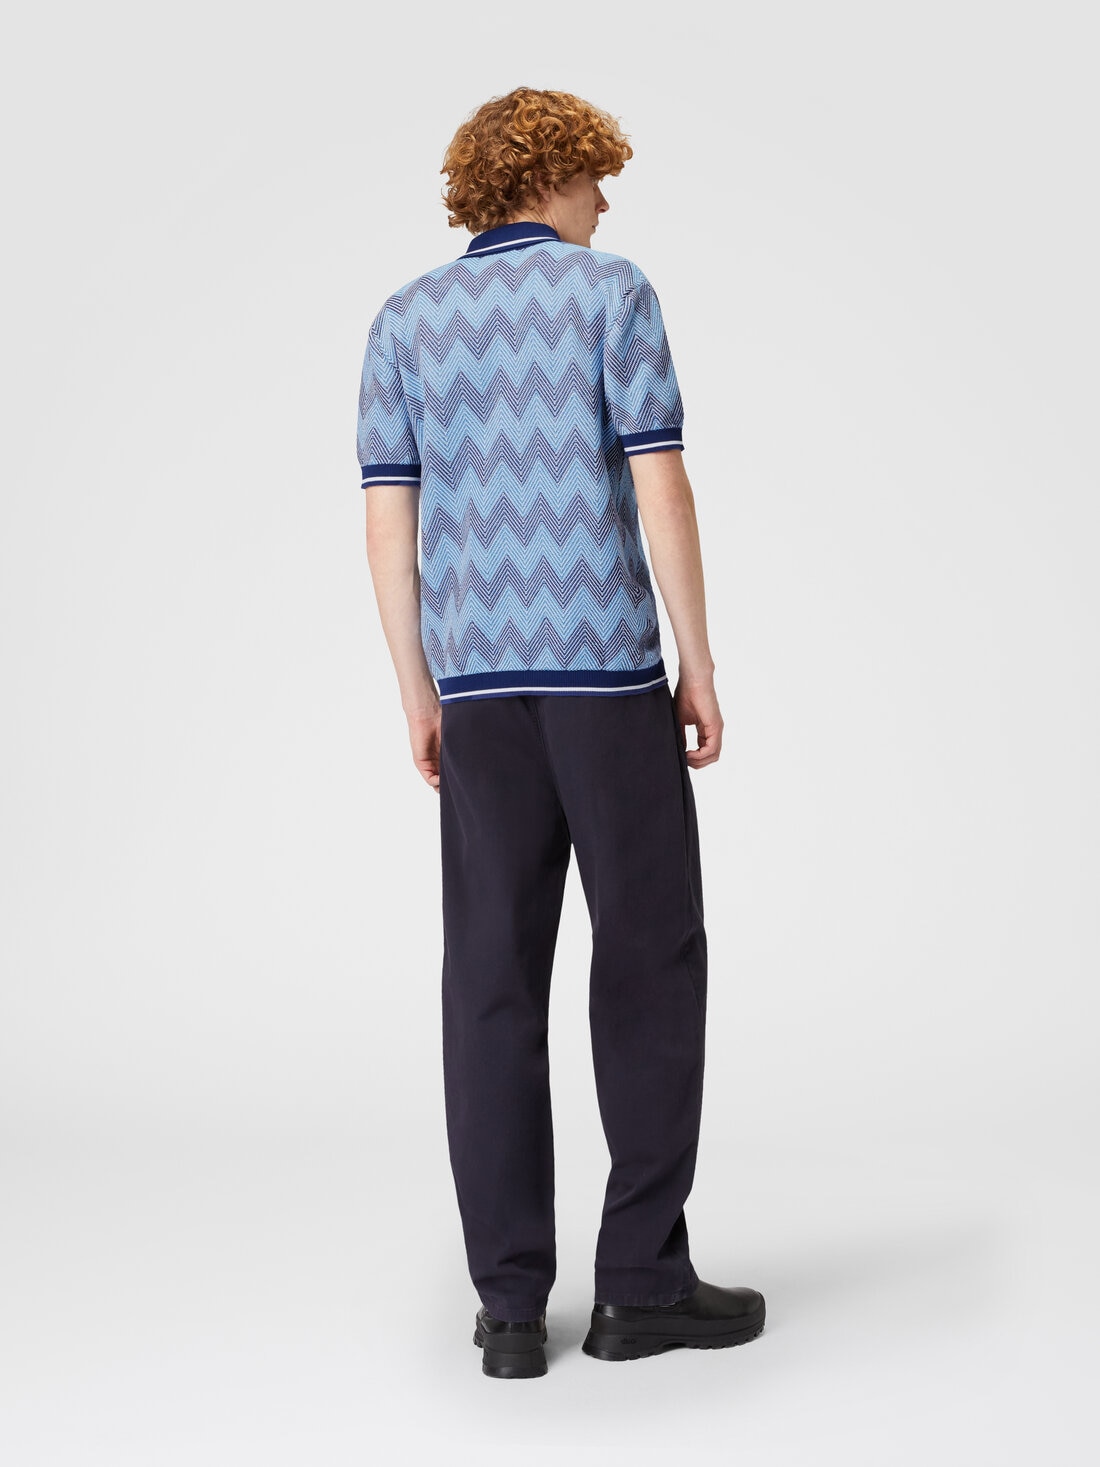 Short-sleeved polo shirt in zigzag cotton with contrasting trim, Blue - US24S209BK034YS72F8 - 2